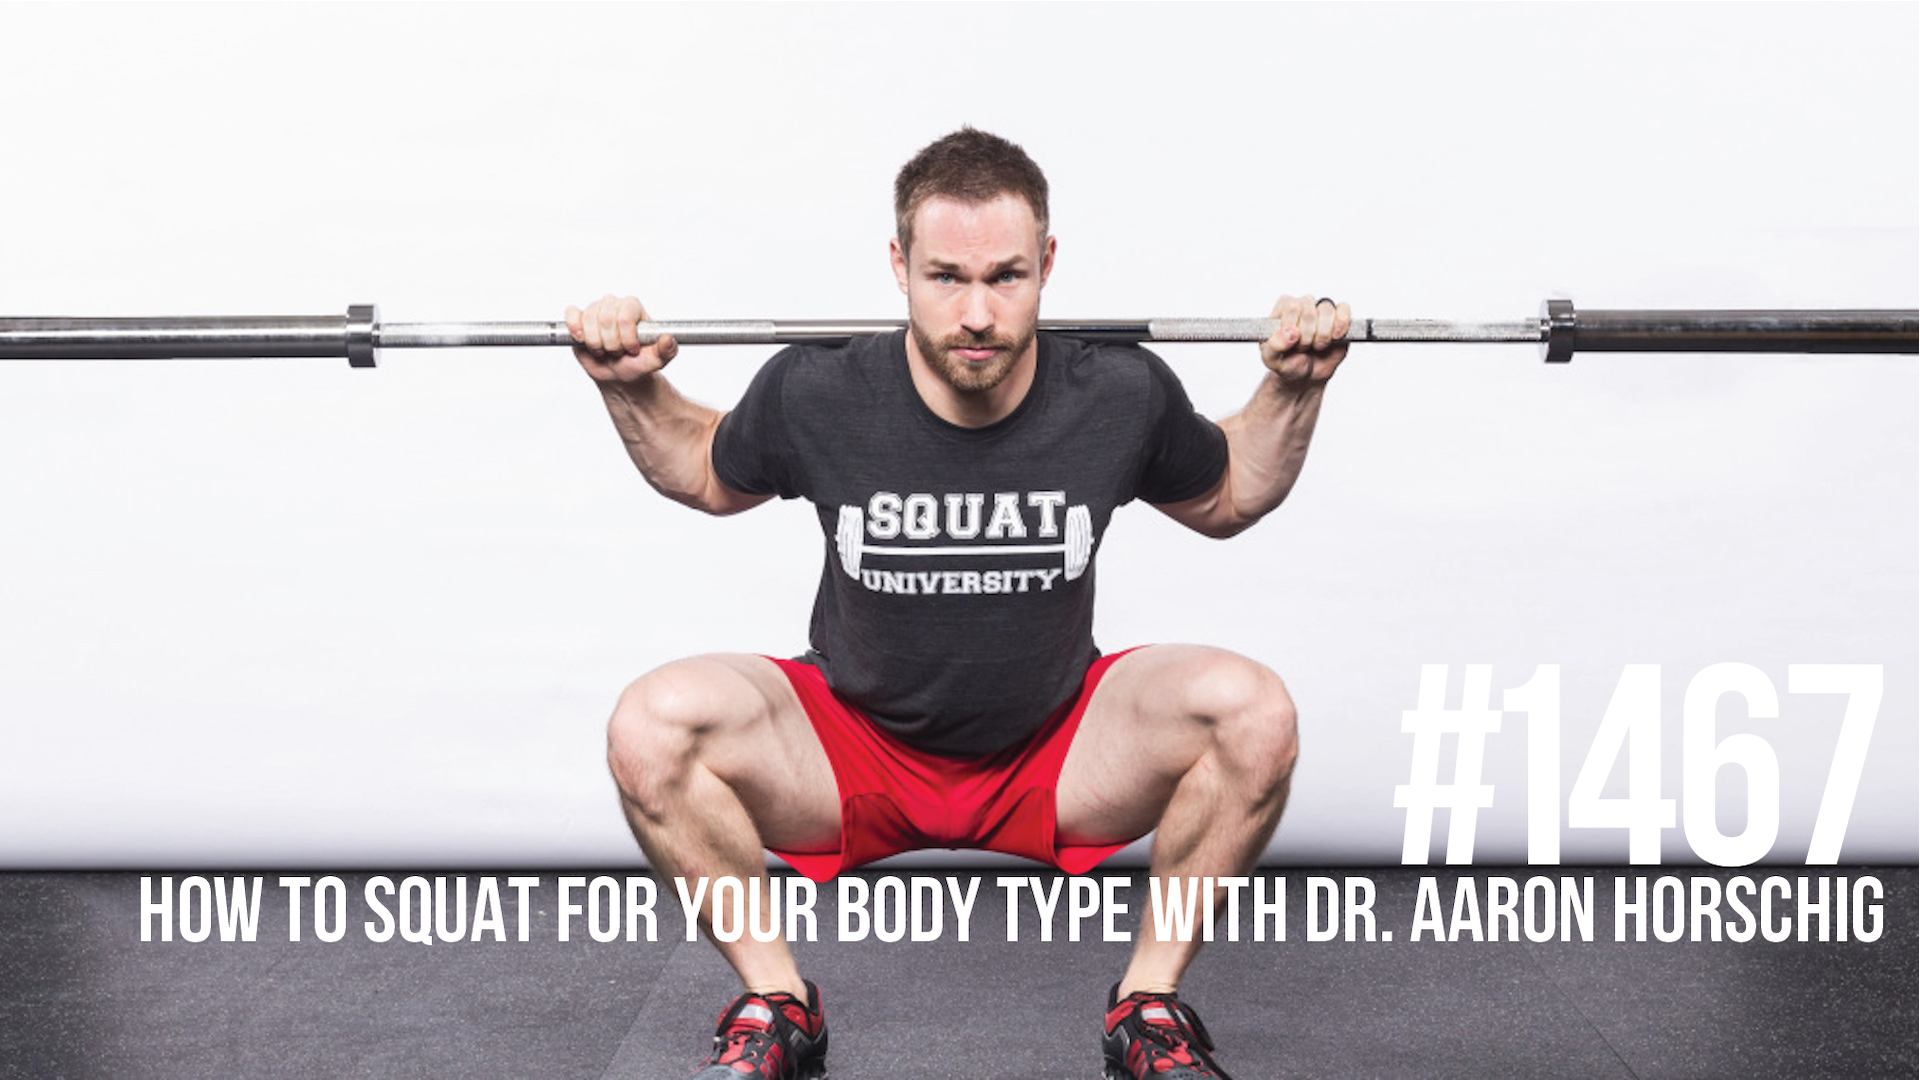 1467: How to Squat for Your Body Type With Dr. Aaron Horschig